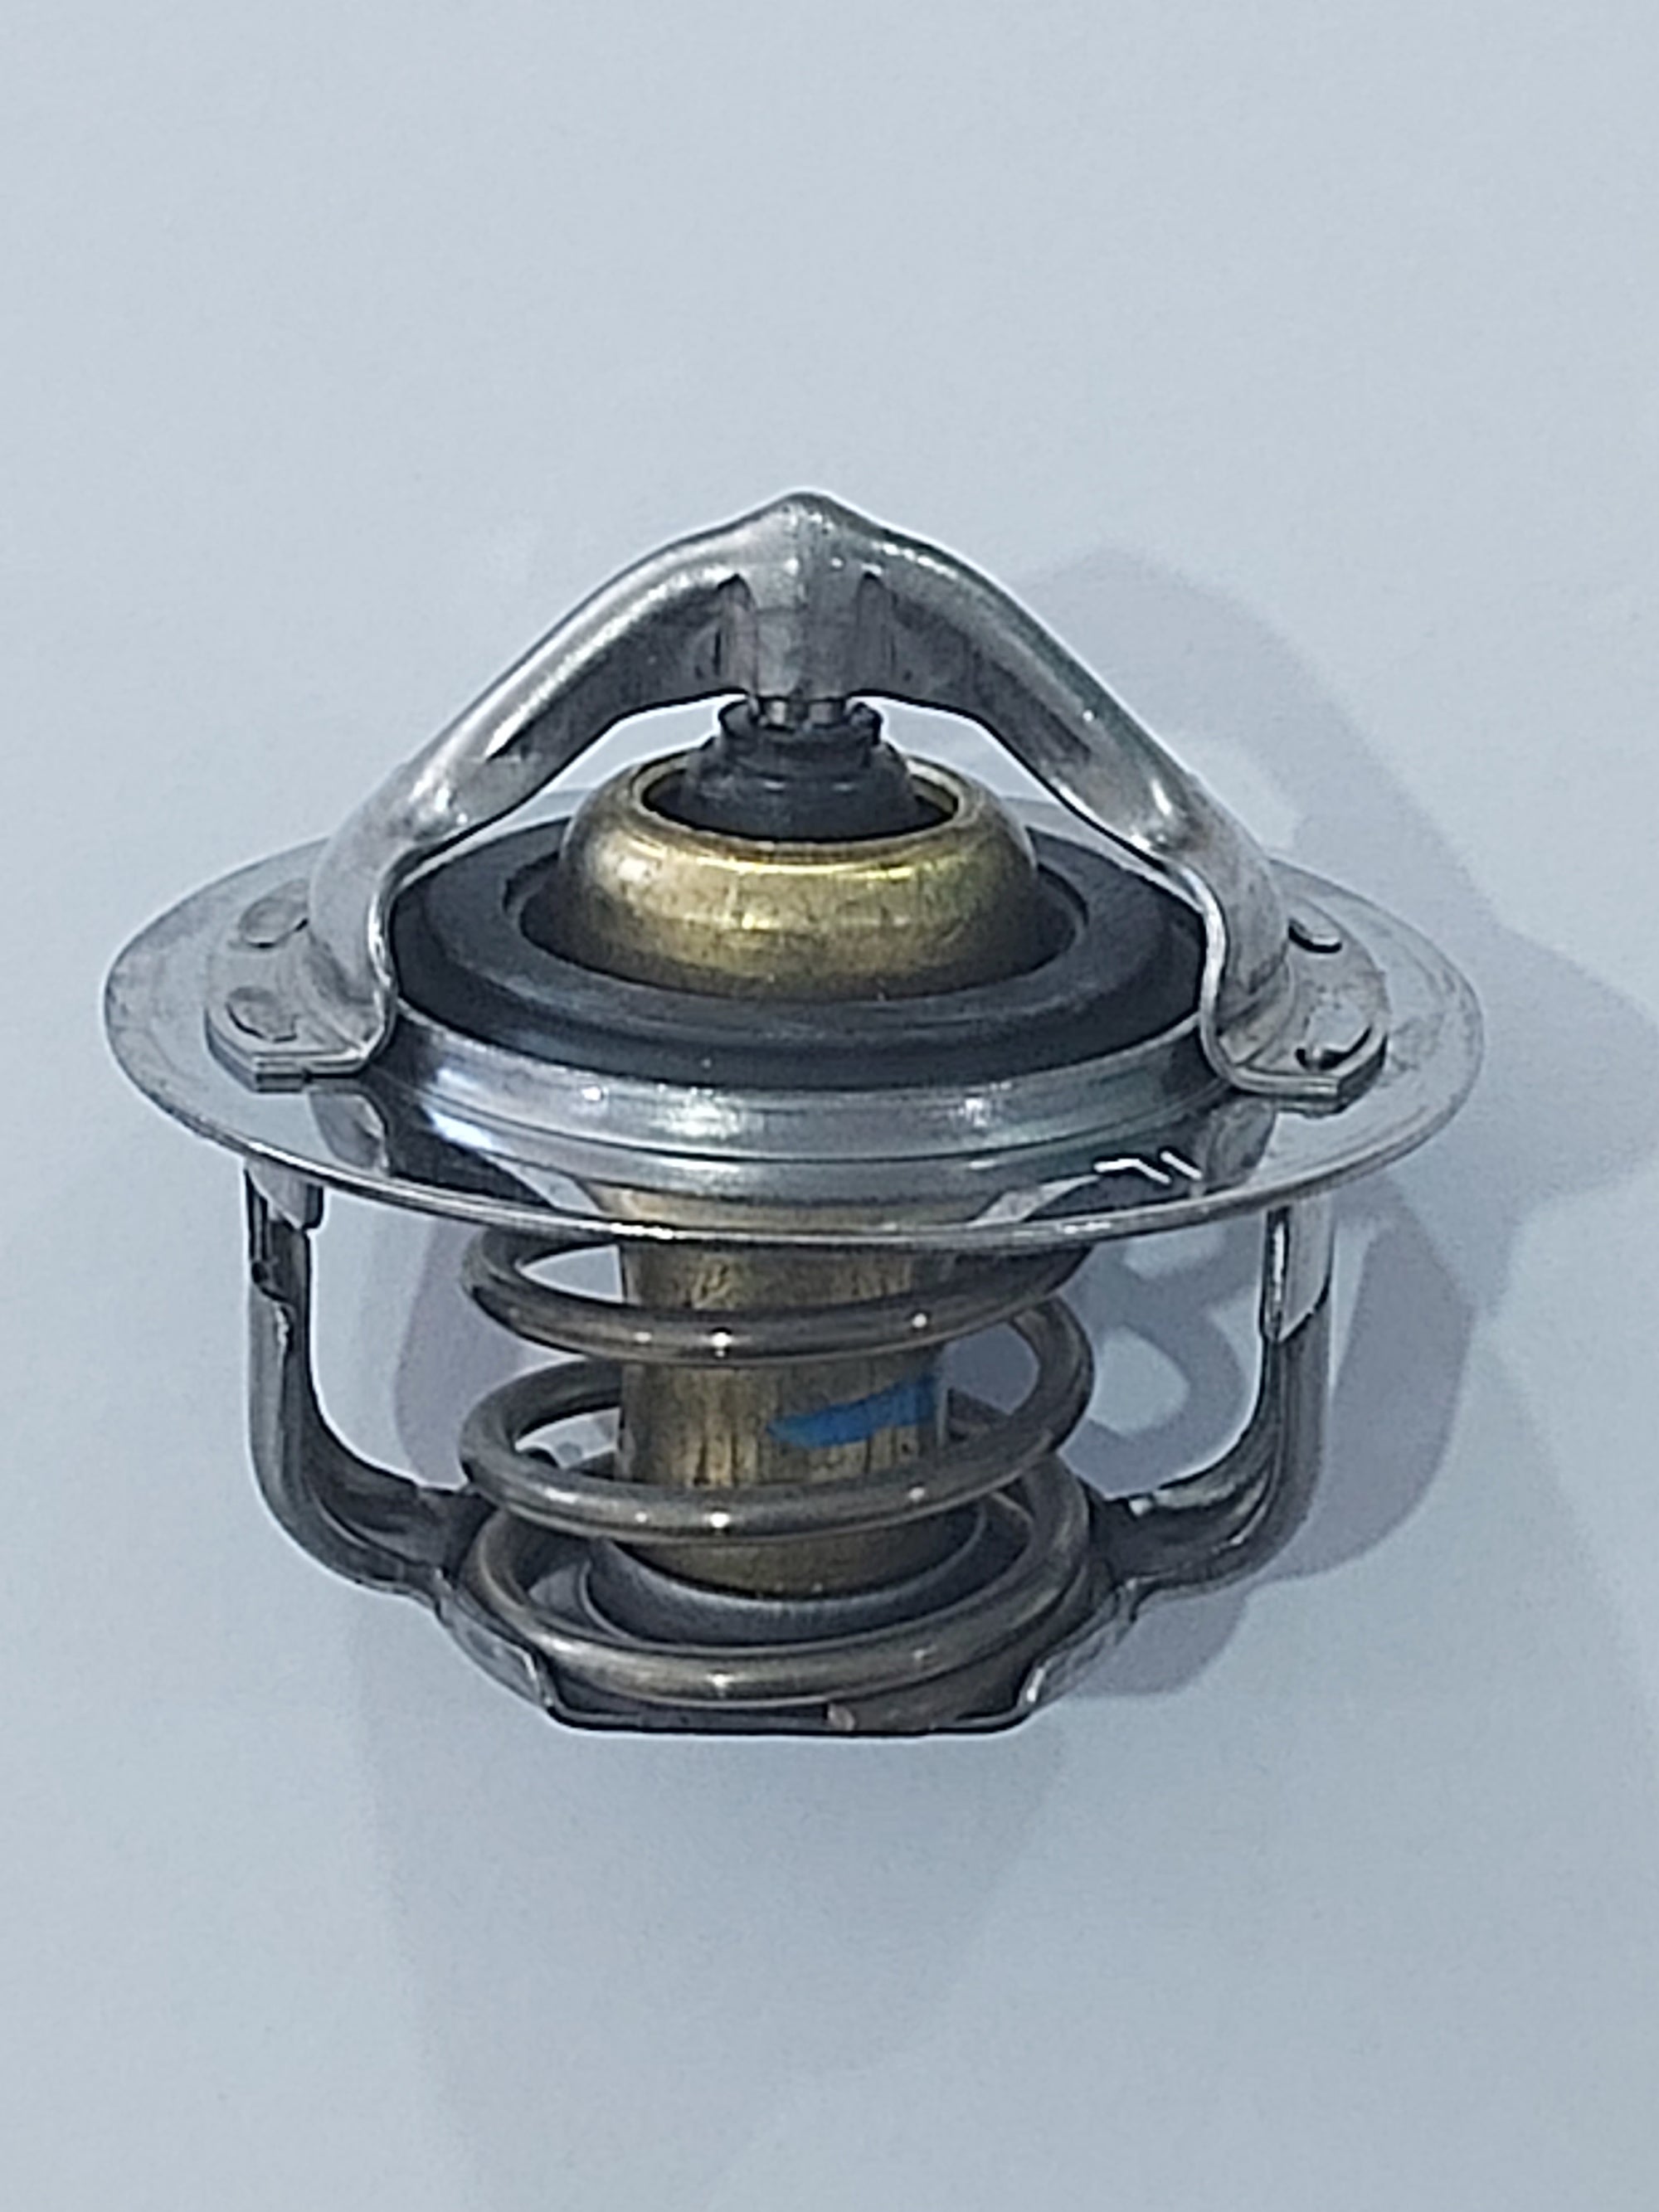 Hyundai Thermostat 00900-BS1S1 for Seasal1 S270 Model